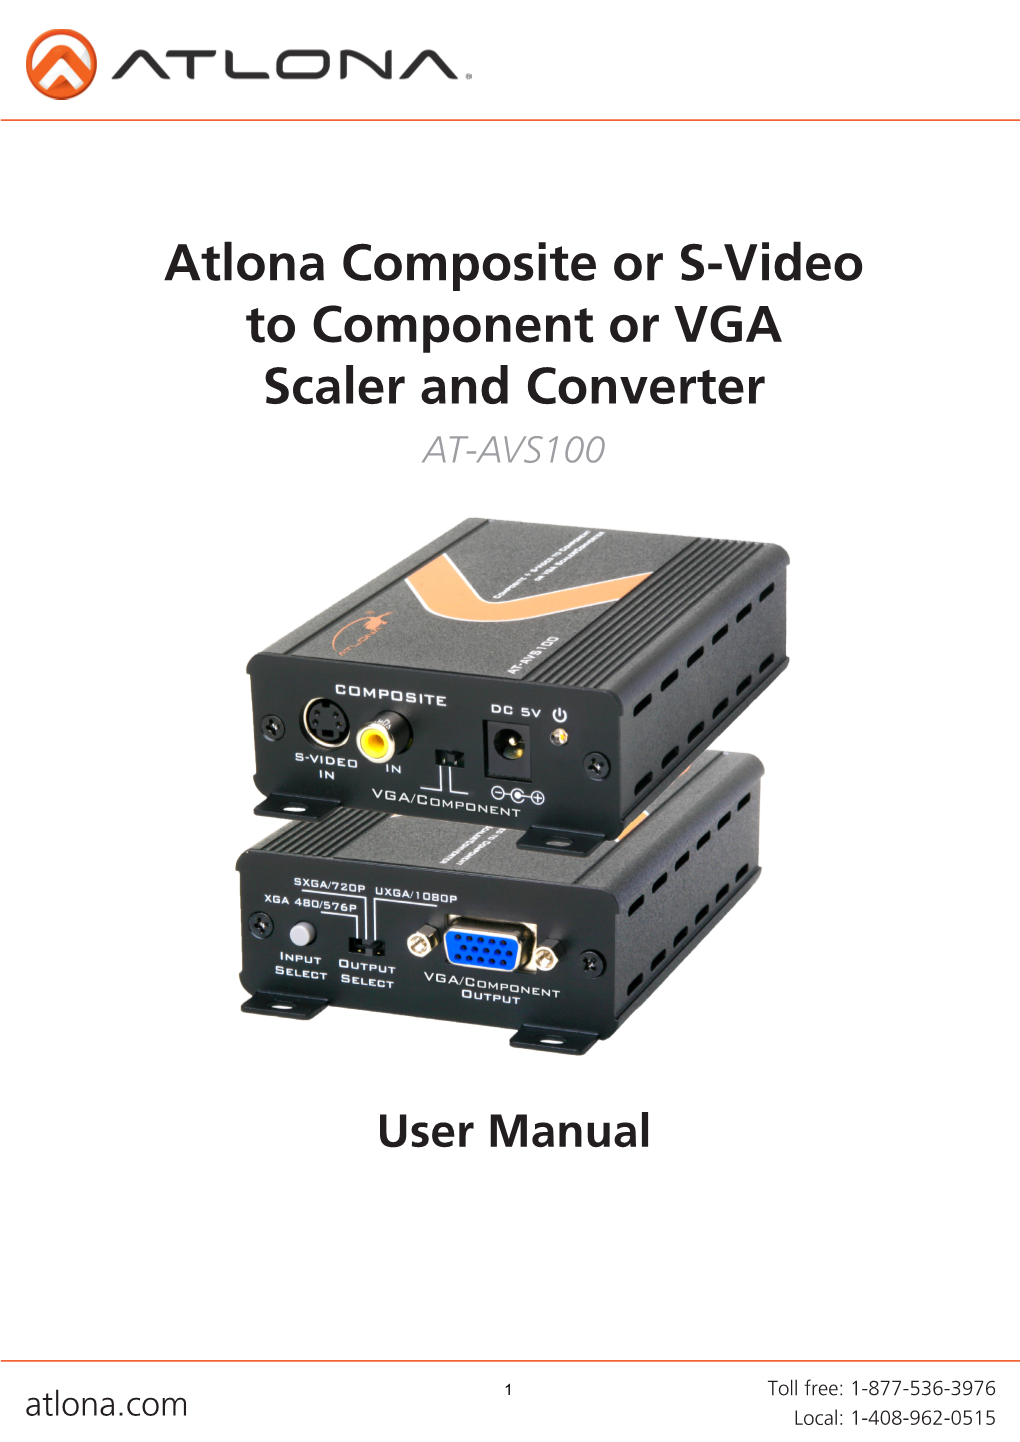 Atlona Composite Or S-Video to Component Or VGA Scaler and Converter AT-AVS100